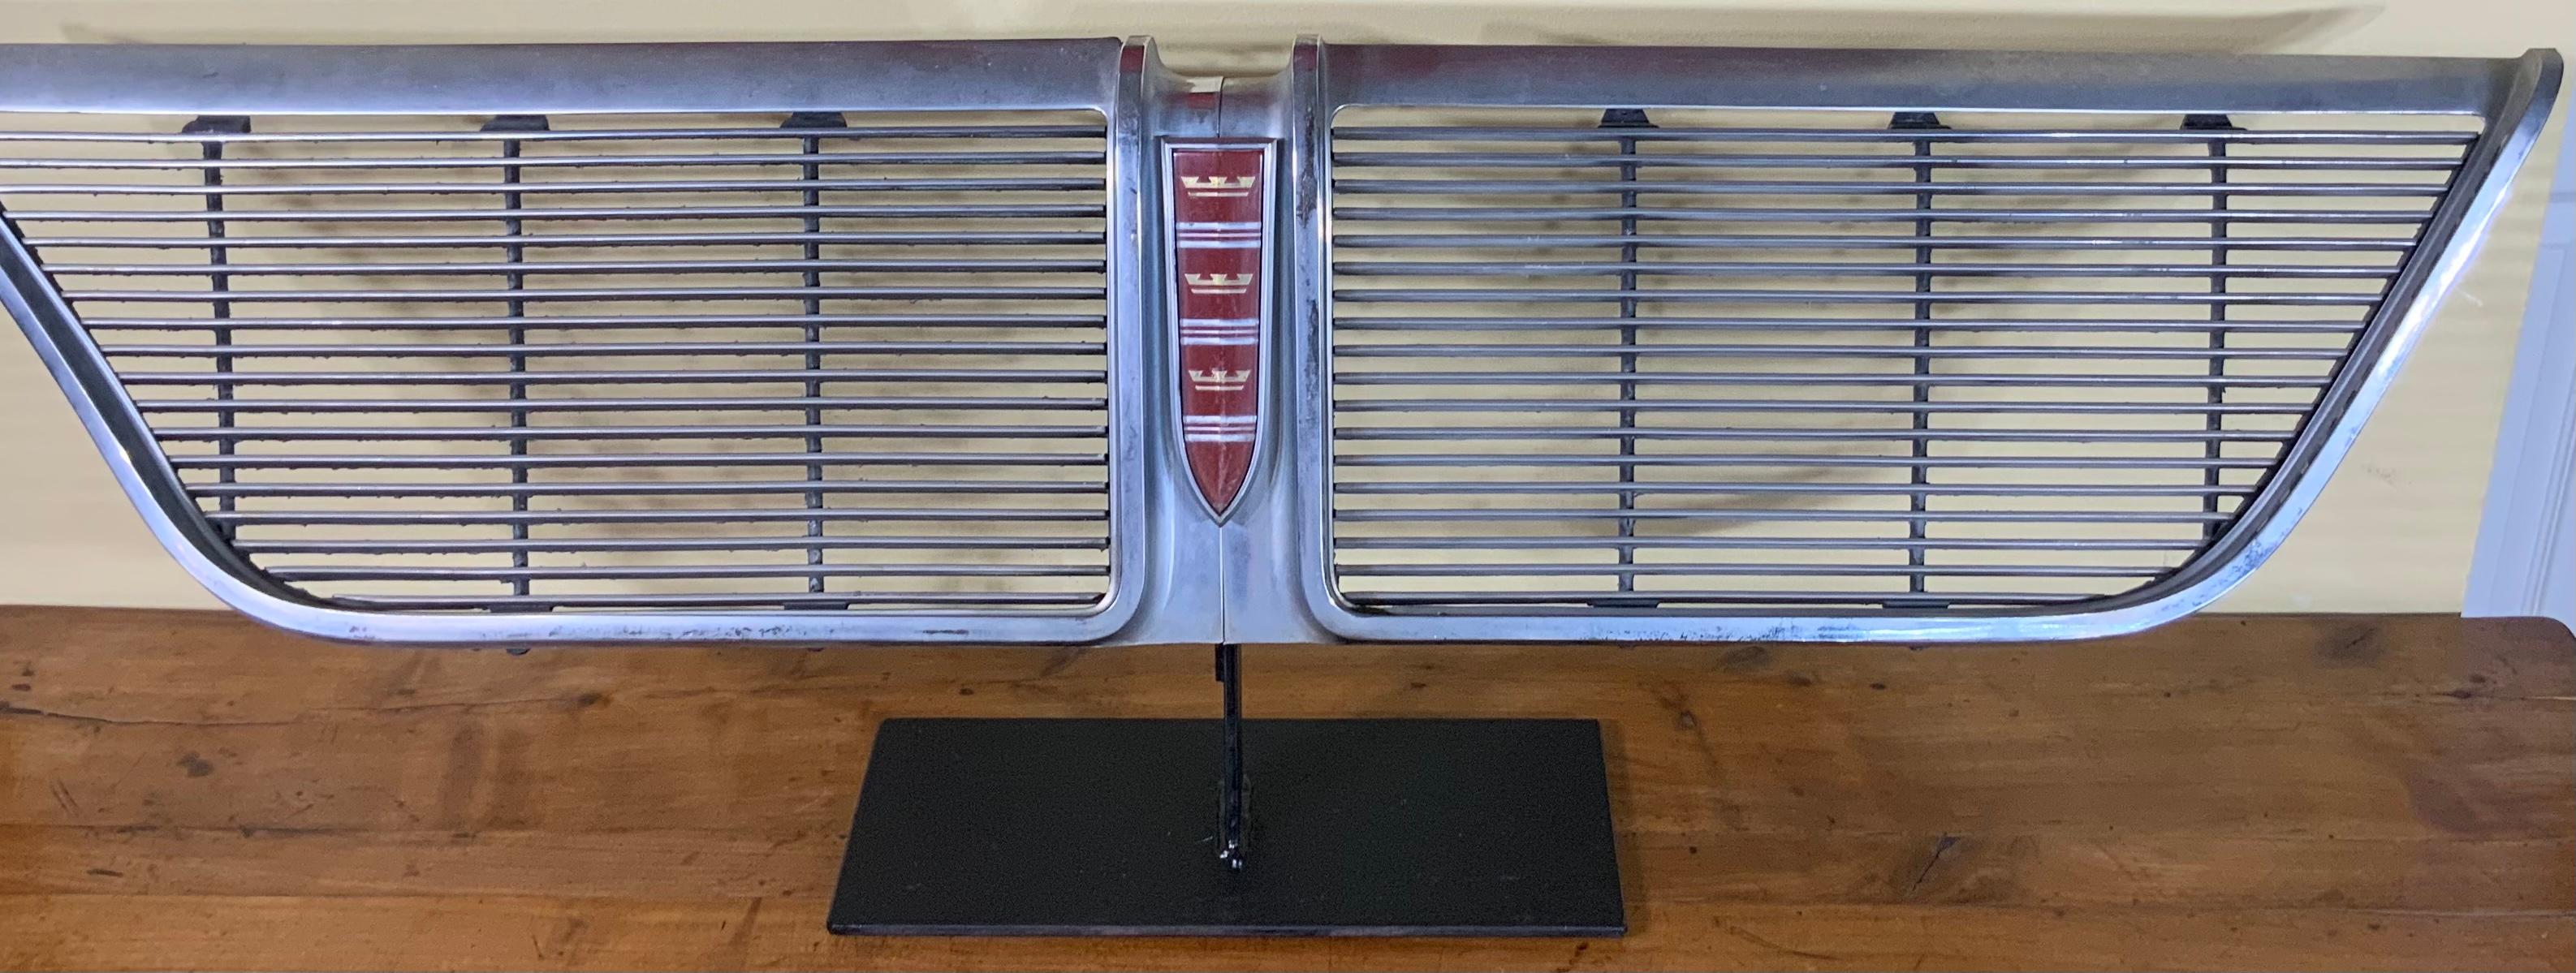 1964 Chrysler New Yorker Chrome Grill professionally mounted on custom-made steel base to make exceptional American industrial object of art for display.
  